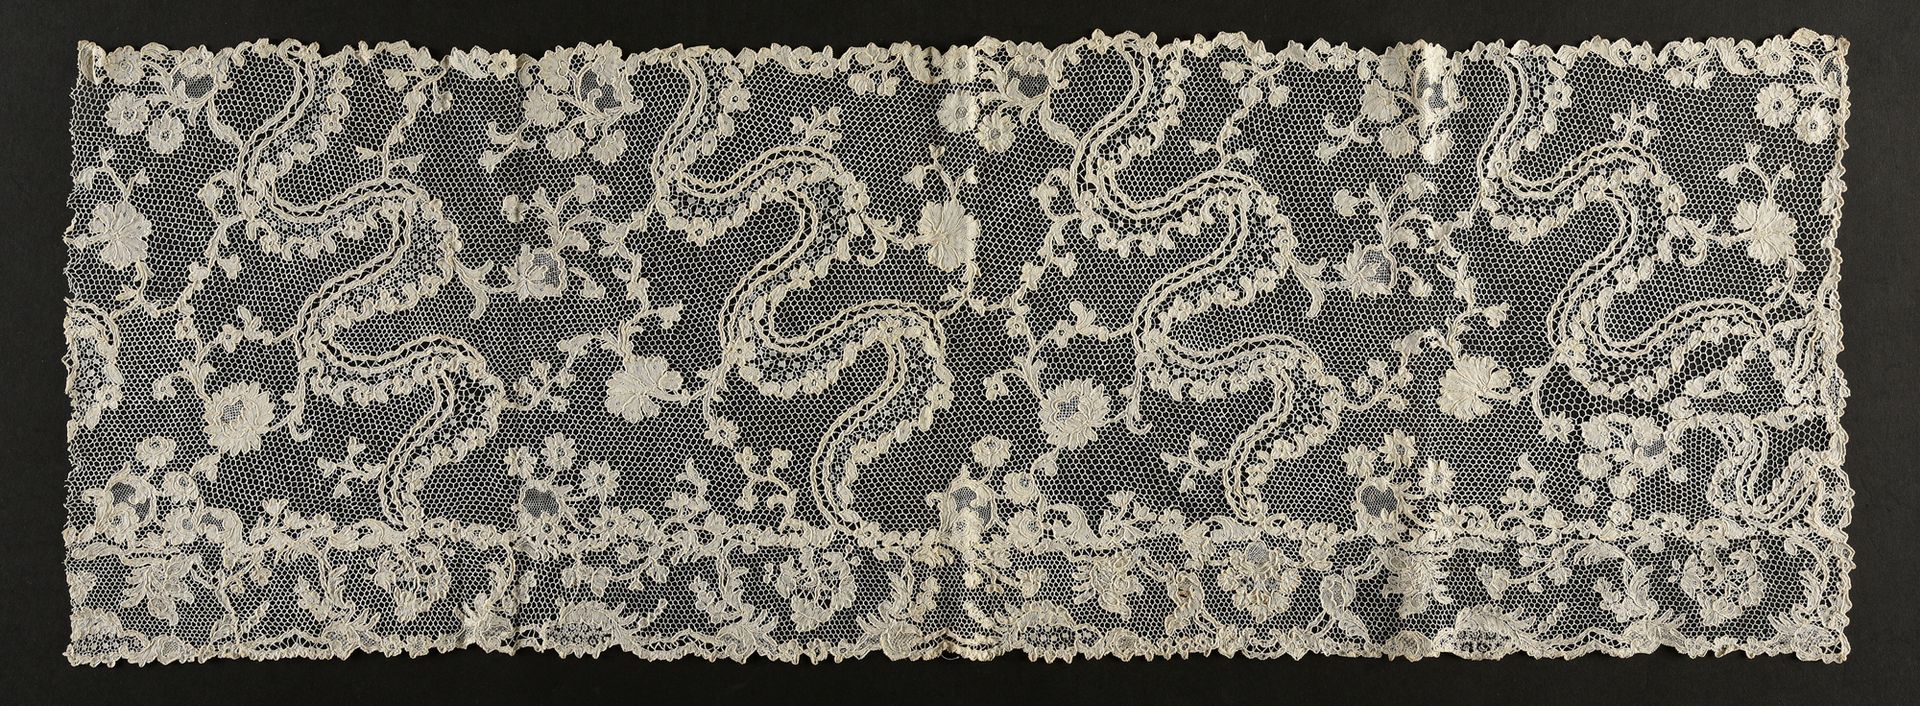 Null Scarf, Argentan, needlework, circa 1750-70.

Scarf enlarged by a ruffle wit&hellip;